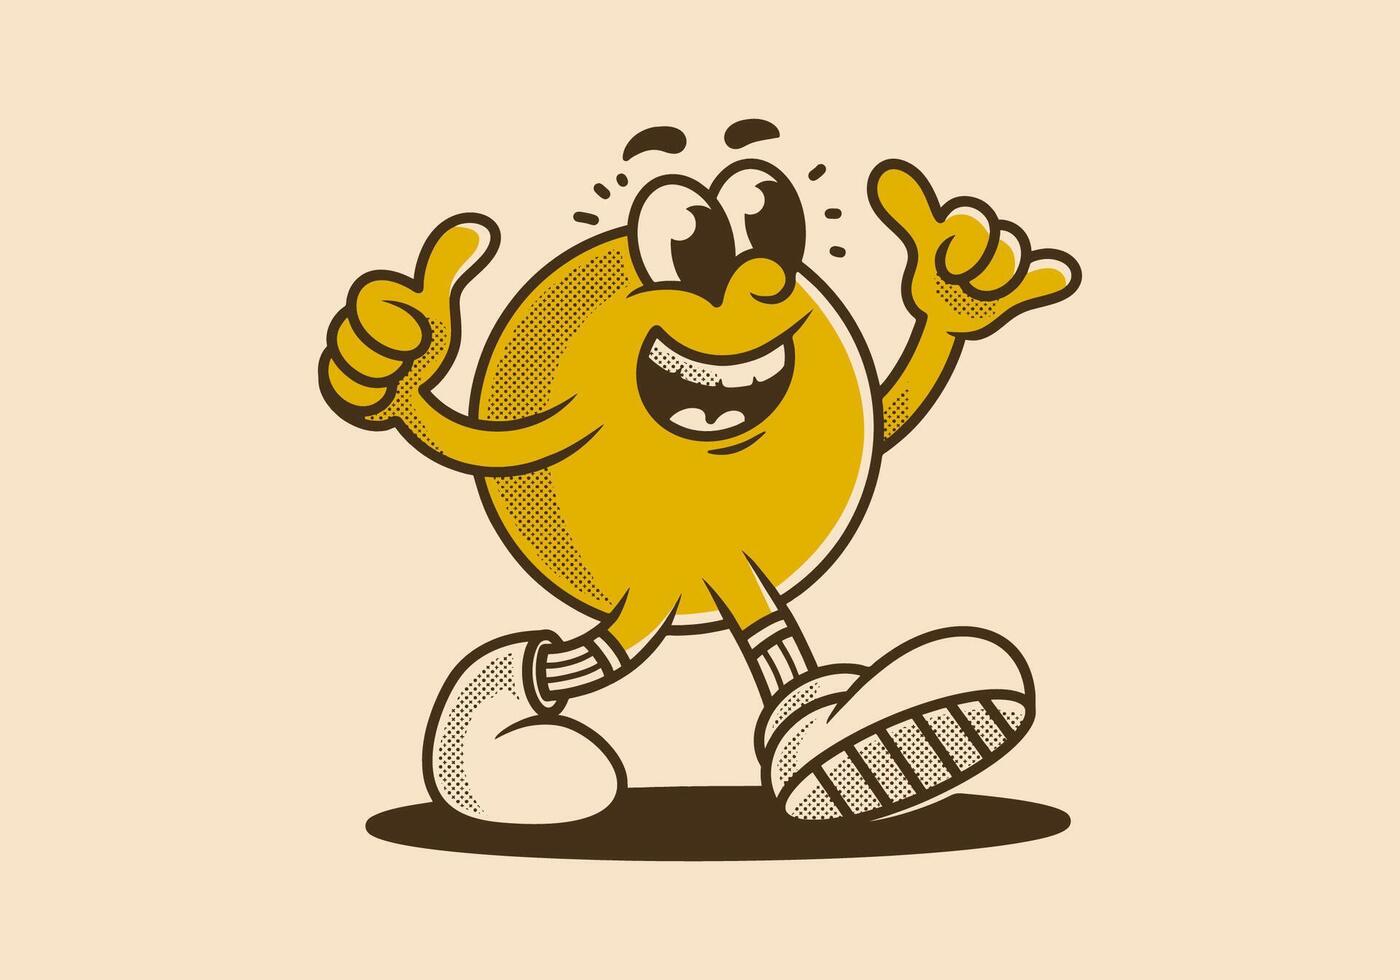 Vintage illustration of walking ball head mascot character with happy face vector